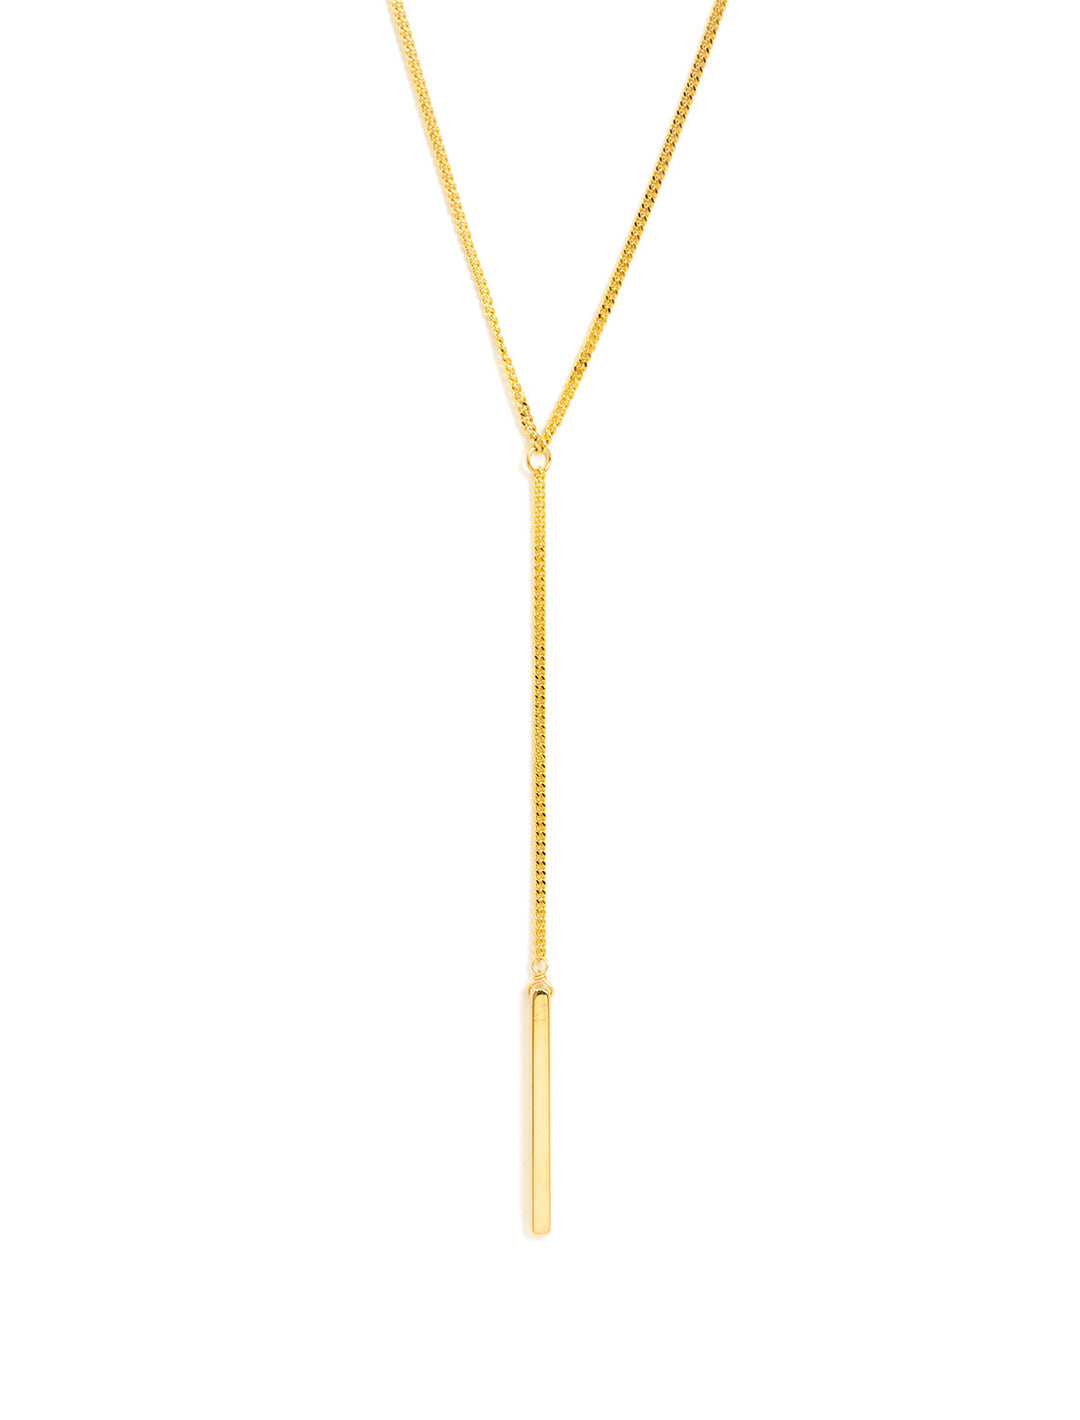 Front view of AV Max's long y bar chain necklace in gold.